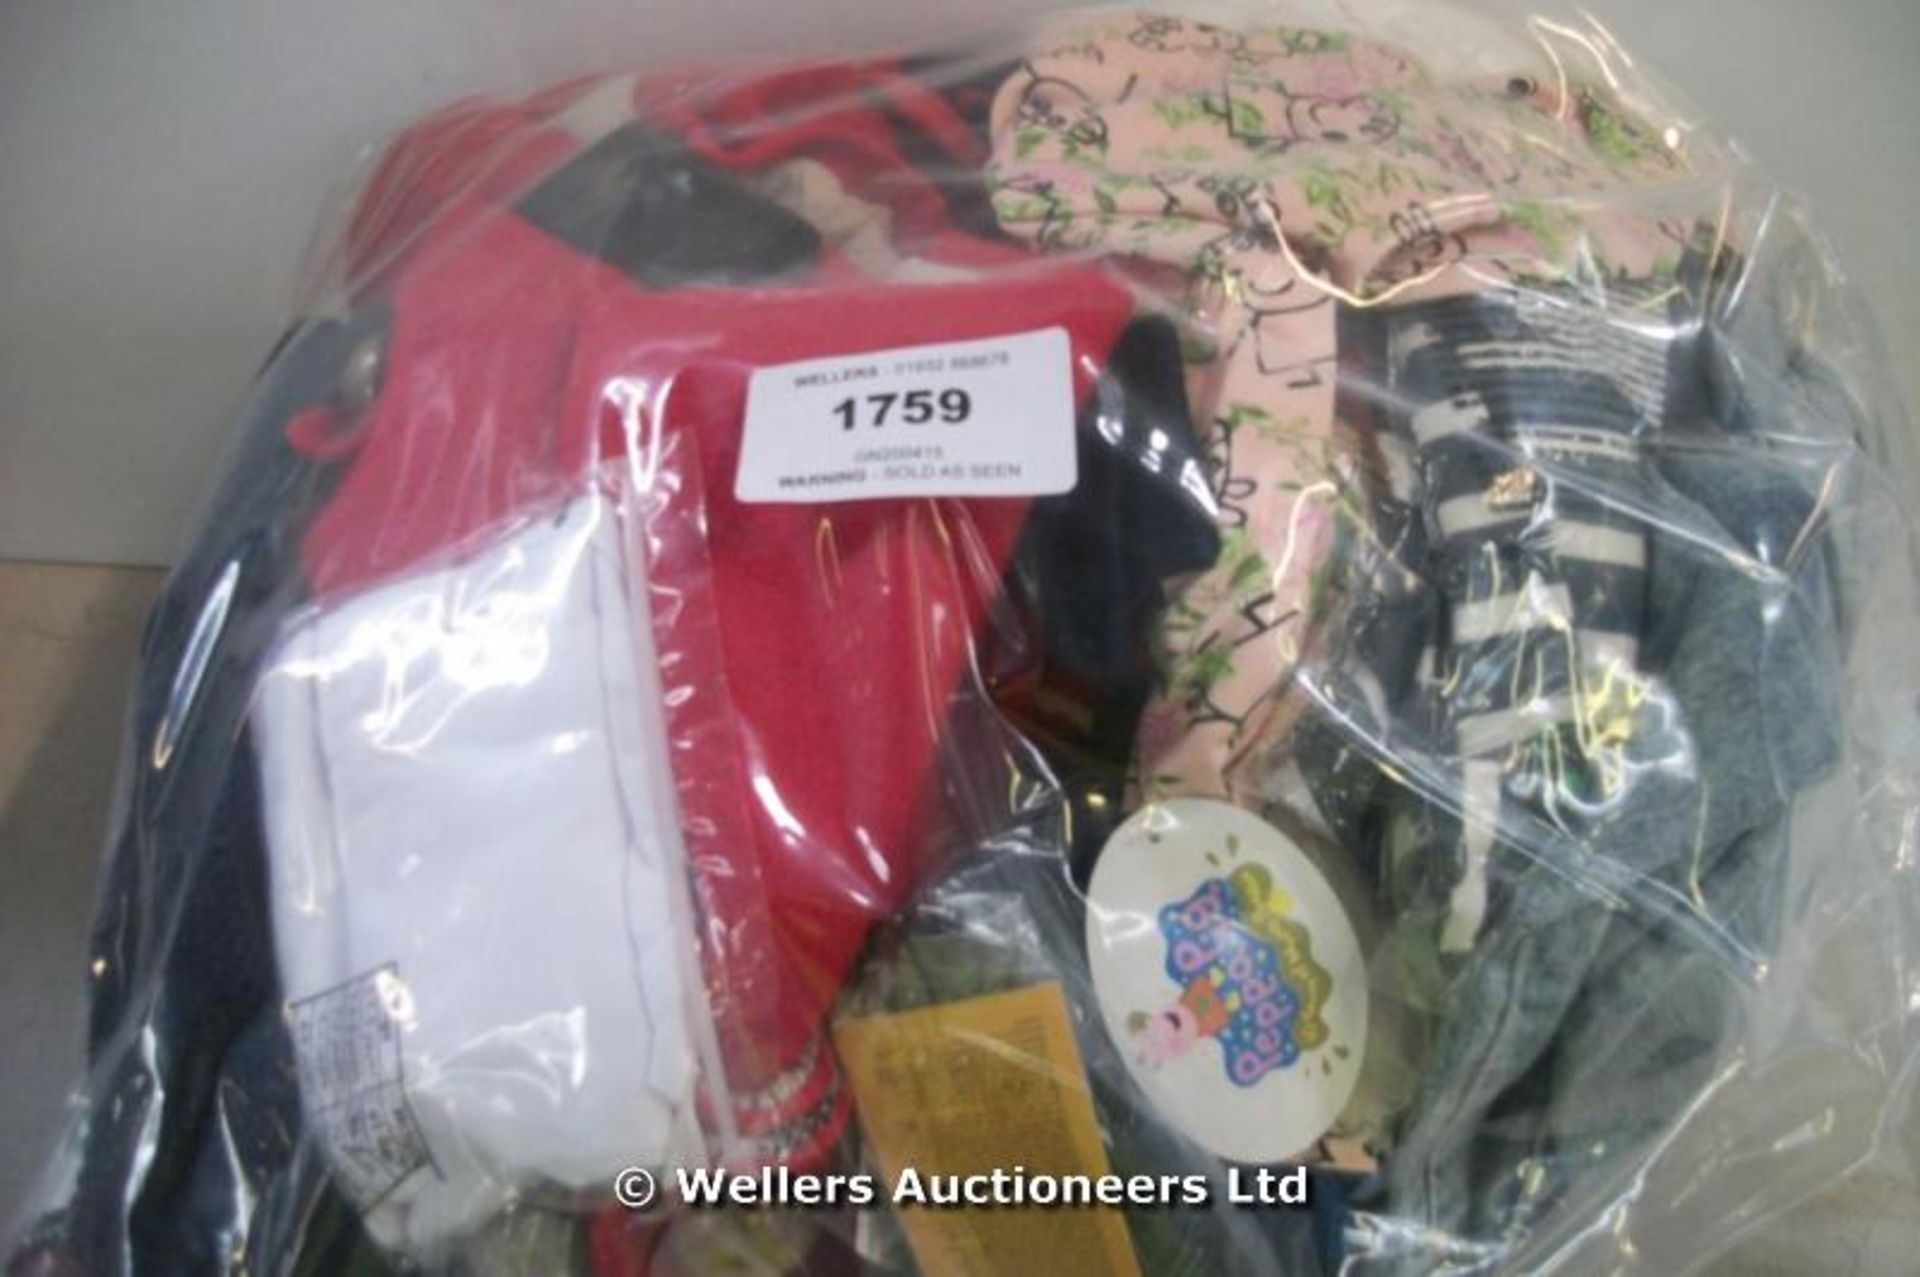 NEW APPROX 30 X MIXED CHILDRENS CLOTHING INC PEPPA PIG,PULL & BEAR,H & M / GRADE: UNCLAIMED PROPERTY